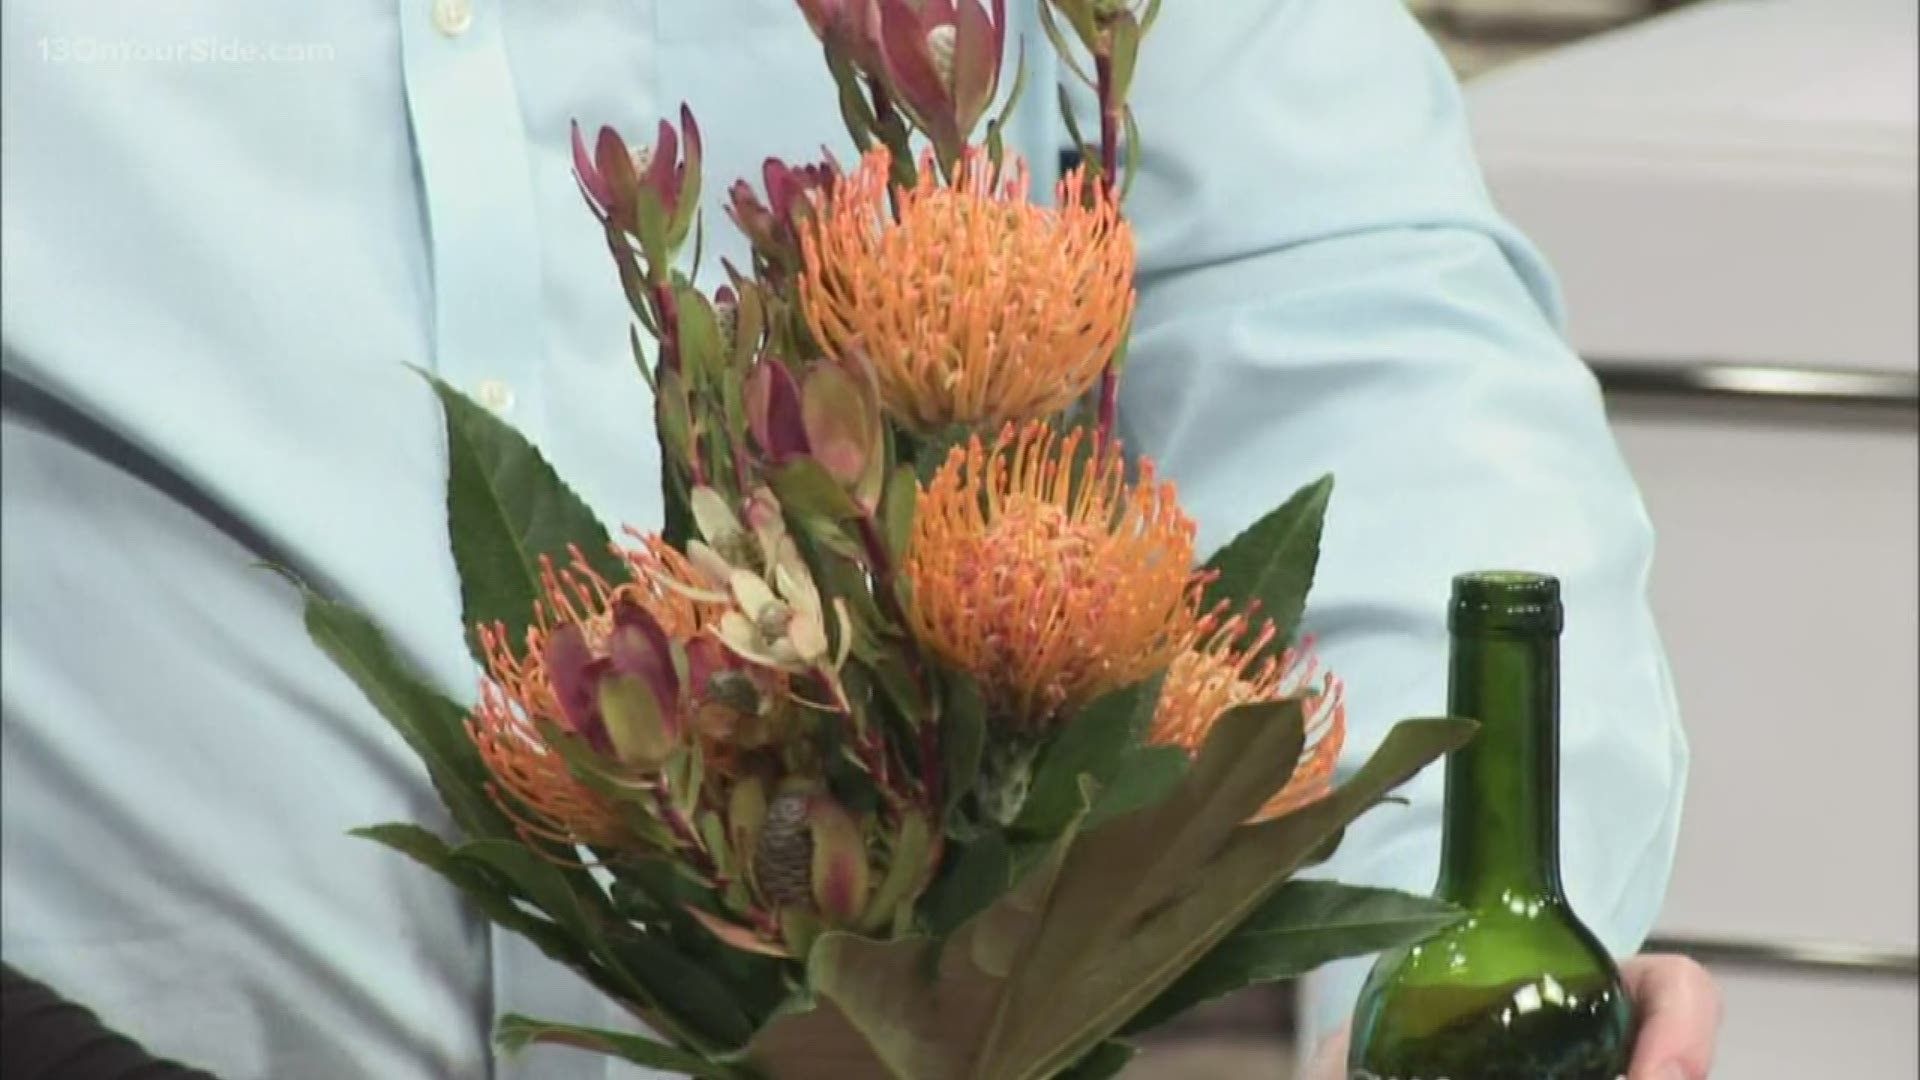 If you're looking to add some flower power to your crafting projects, look no further than the protea!

J Schwanke from UBloom.com stopped by to show us how to use the protea to add a splash of color to your home.